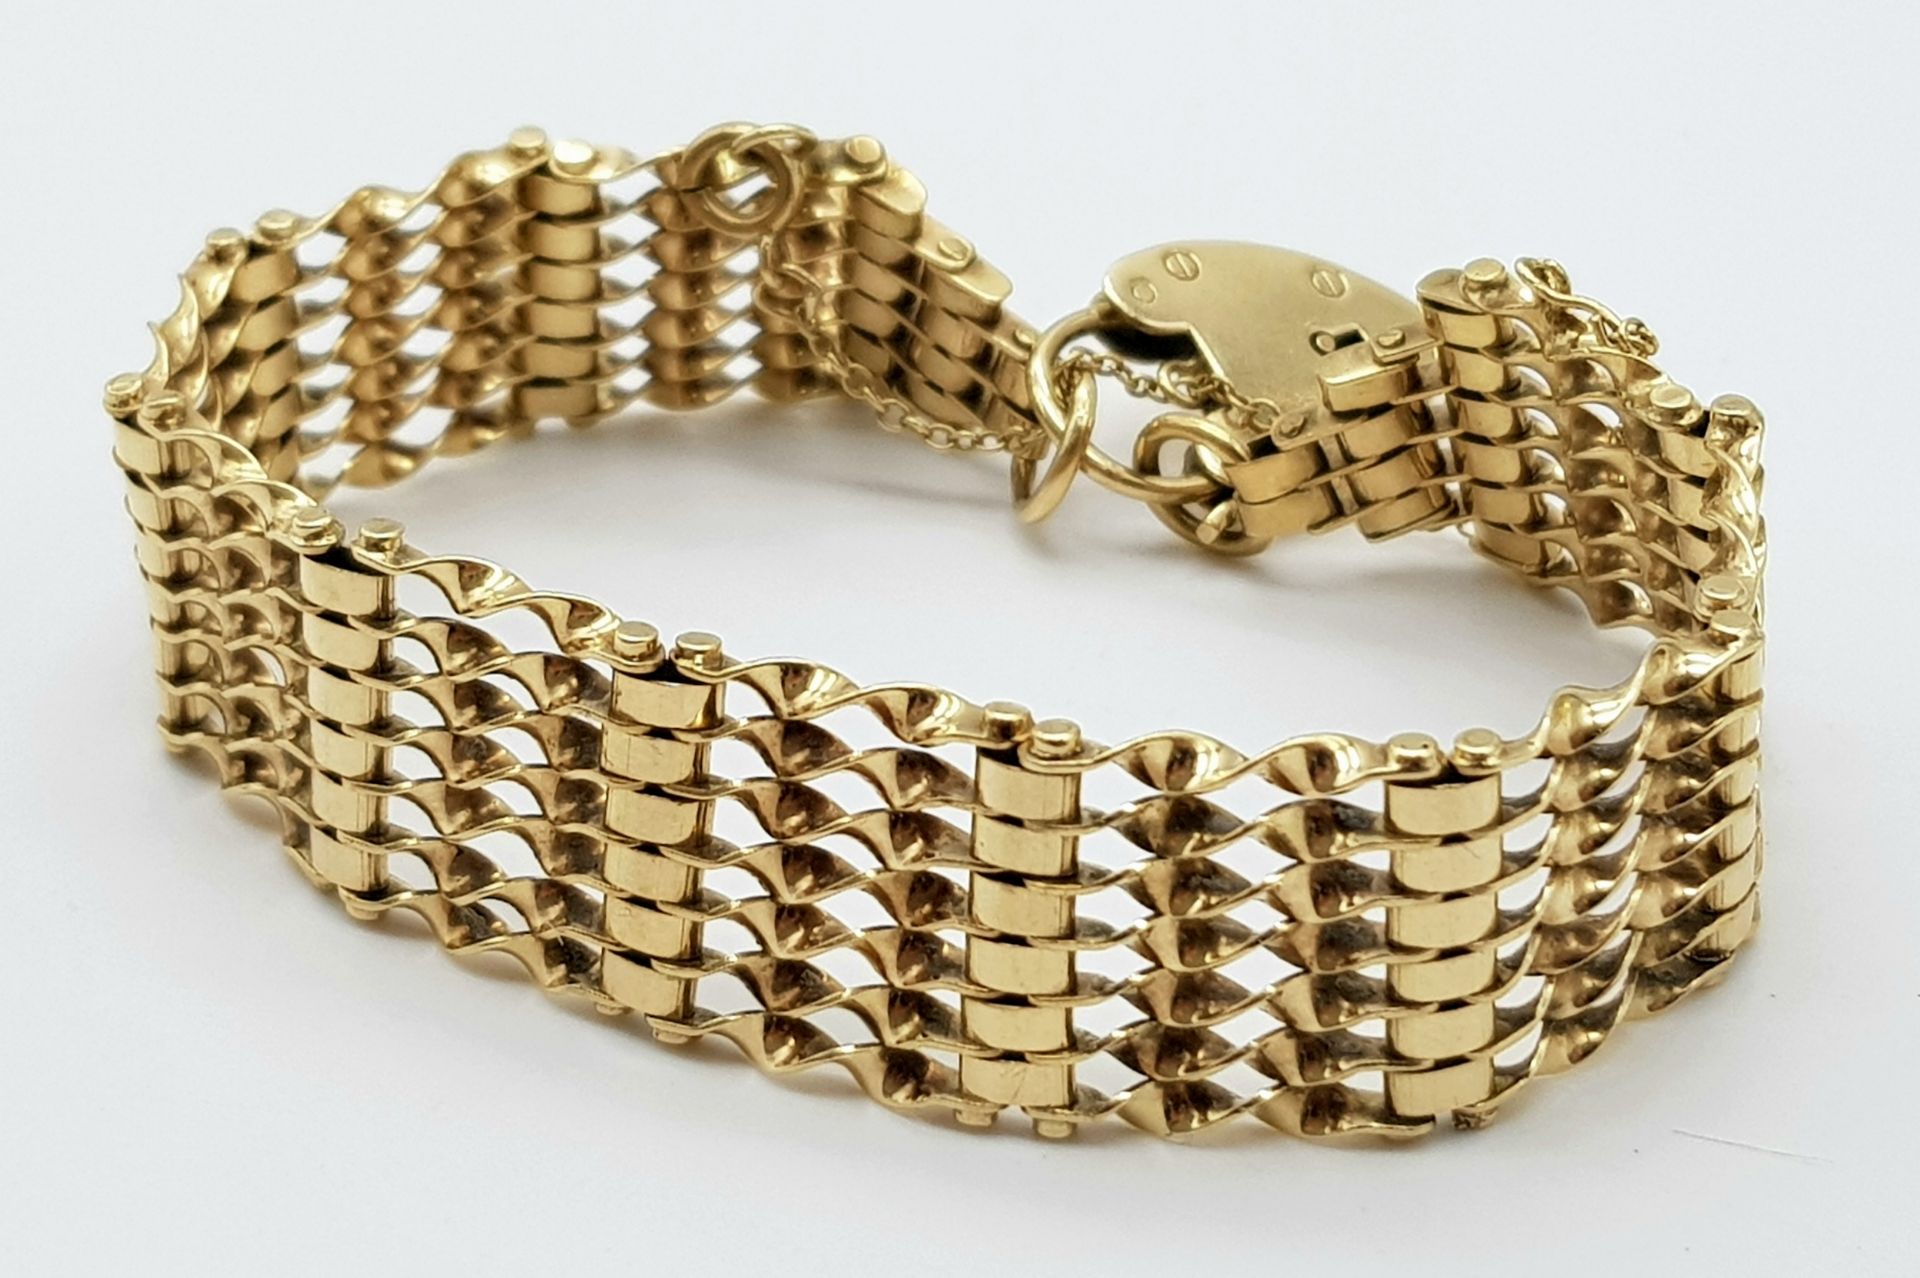 A 9K Yellow Gold gate Bracelet with Heart Clasp. 16mm width. 19.6g weight. - Image 2 of 6